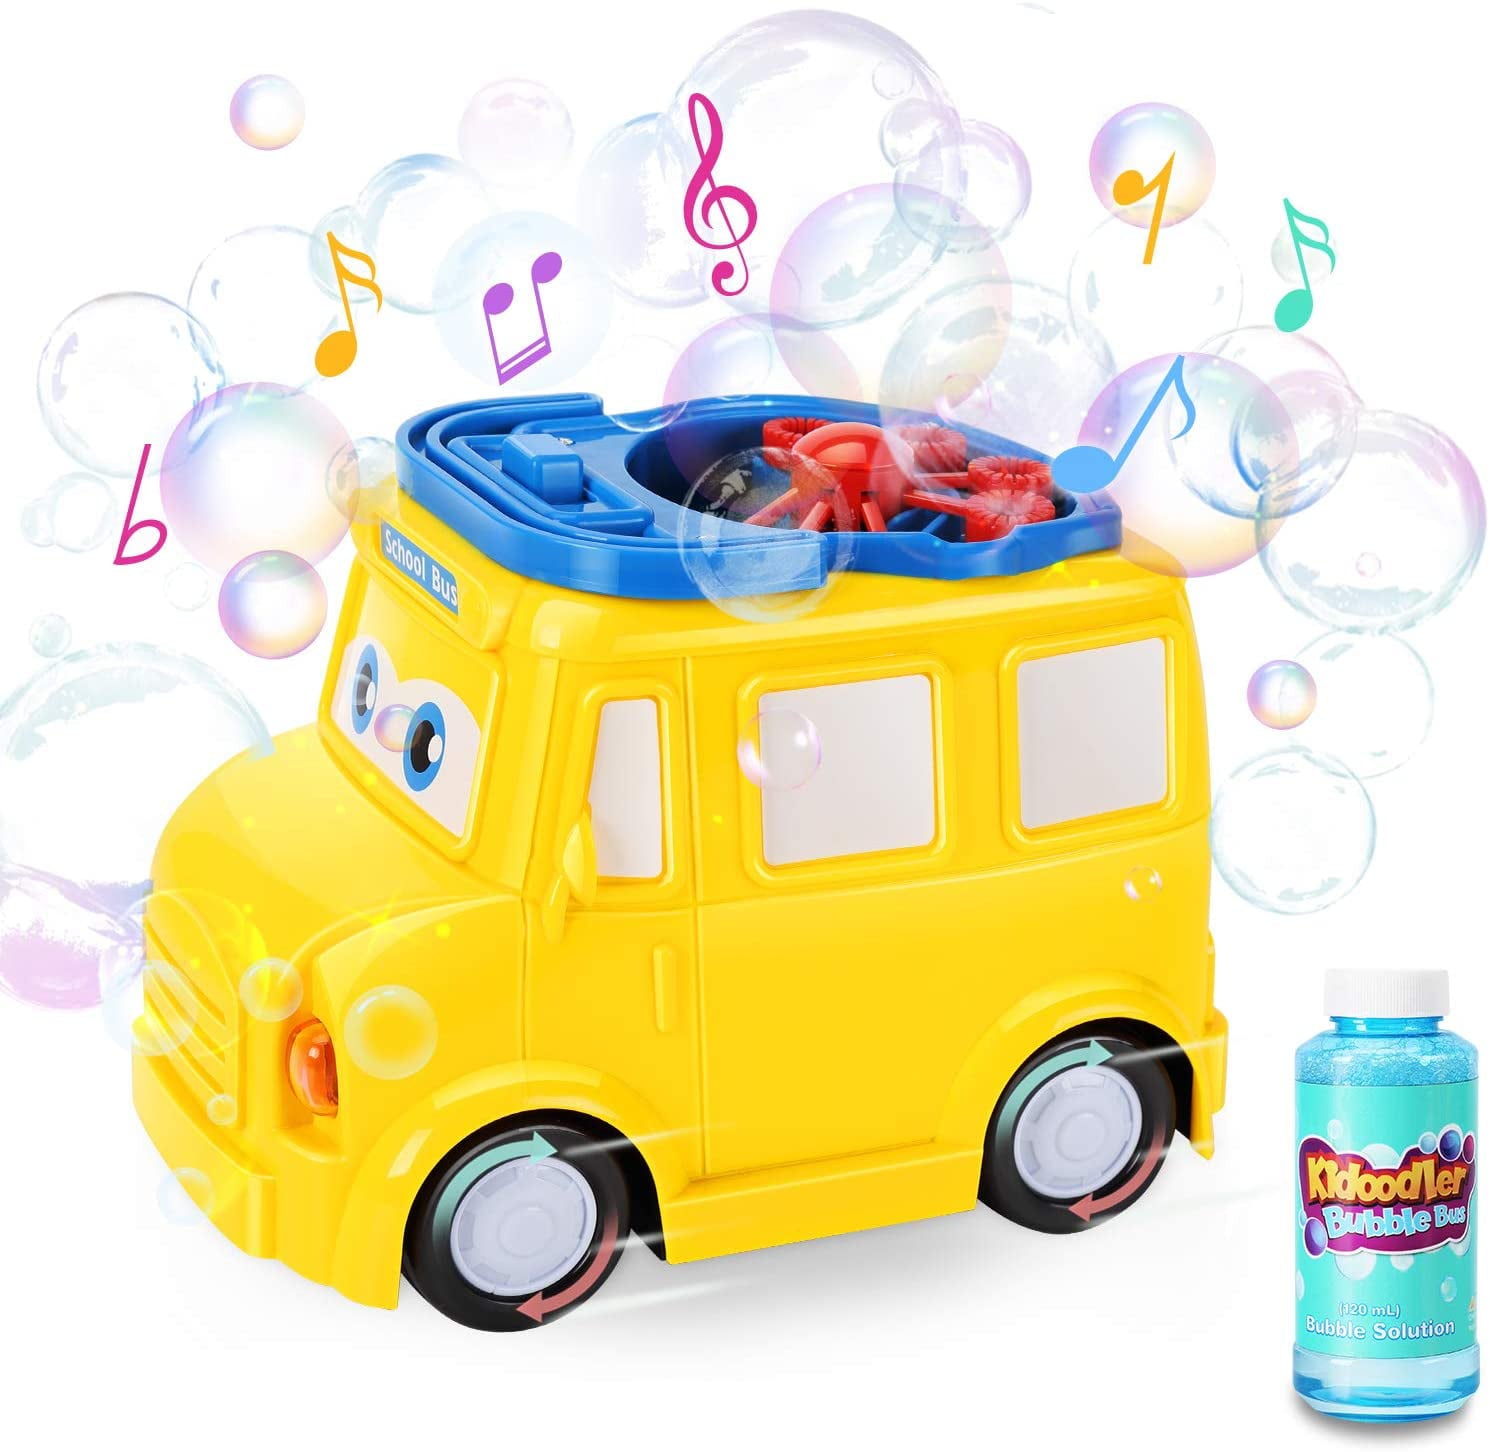 Lavinya Bubble Machine Bus, Mobile or Stationary, Light & Music, 360° Rotation & Portable, Bubble Machine/Bubble Blower for Kids